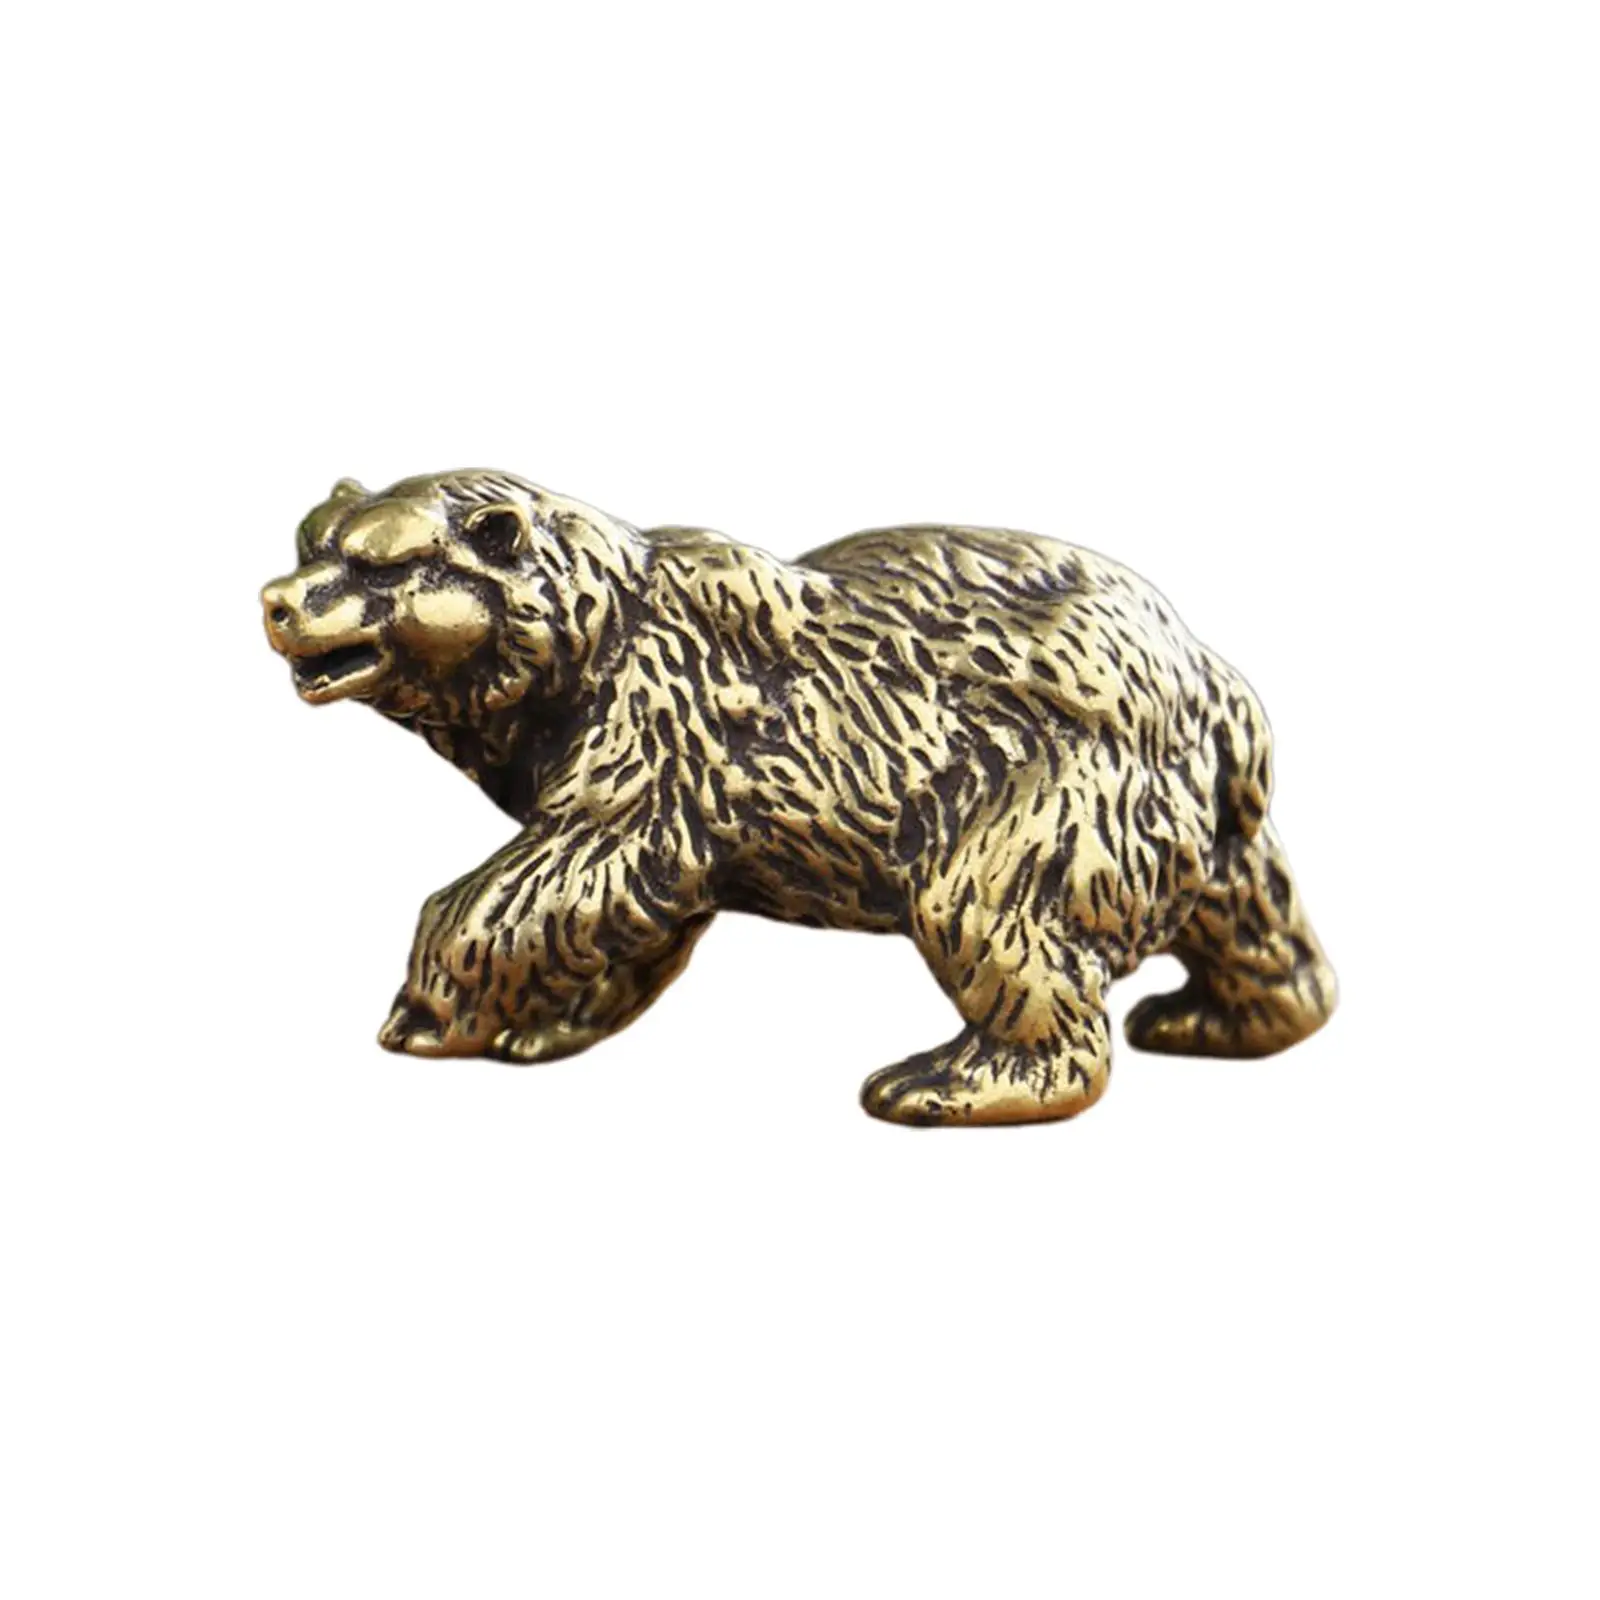 Bear Ornament Handmade Small Gifts Art Crafts Retro Powerful Animal Statue for Cafe Tabletop Living Room Bookcase Shelf Outdoor